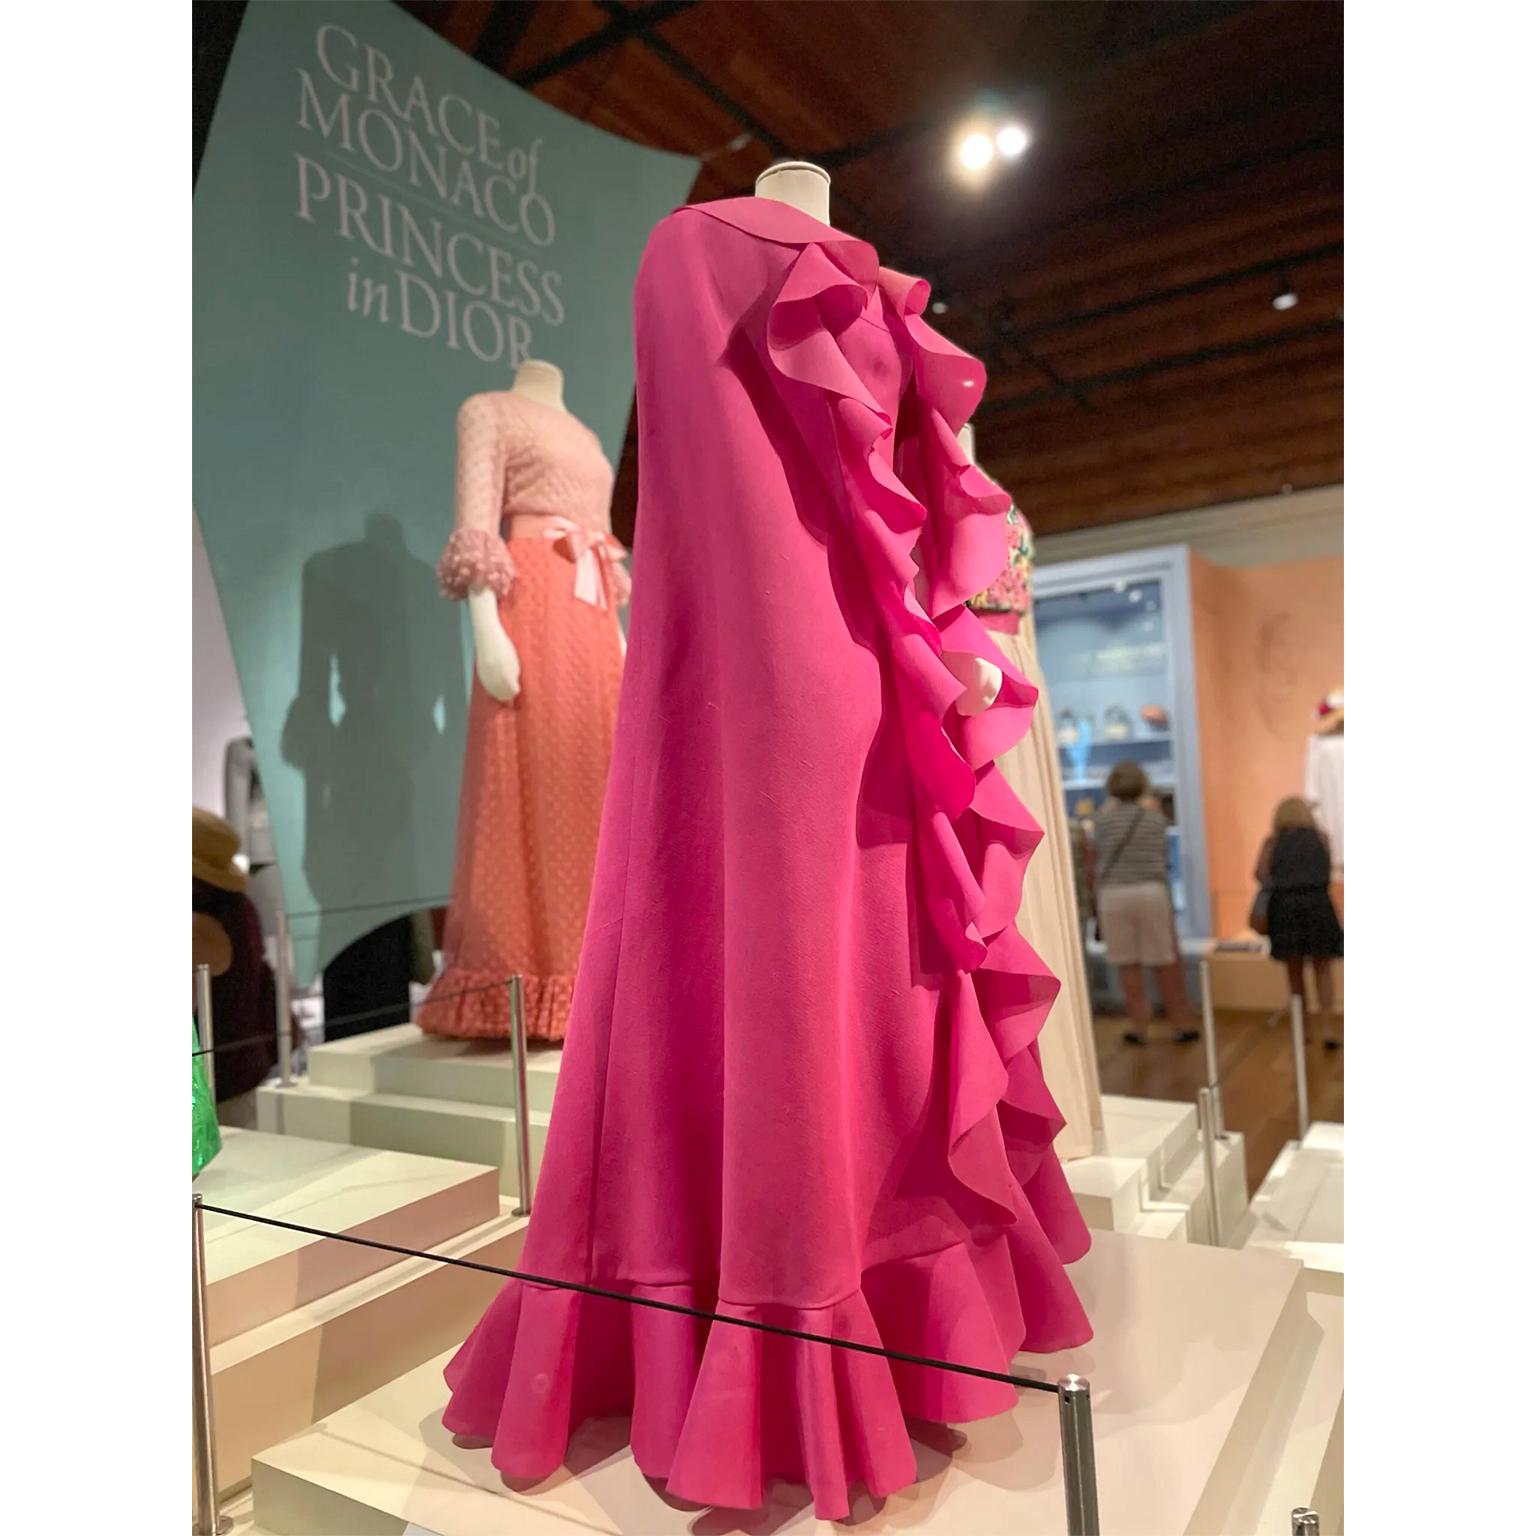 1971 Christian Dior Haute Couture Pink Ruffled Runway Evening Dress Grace Kelly  For Sale 11